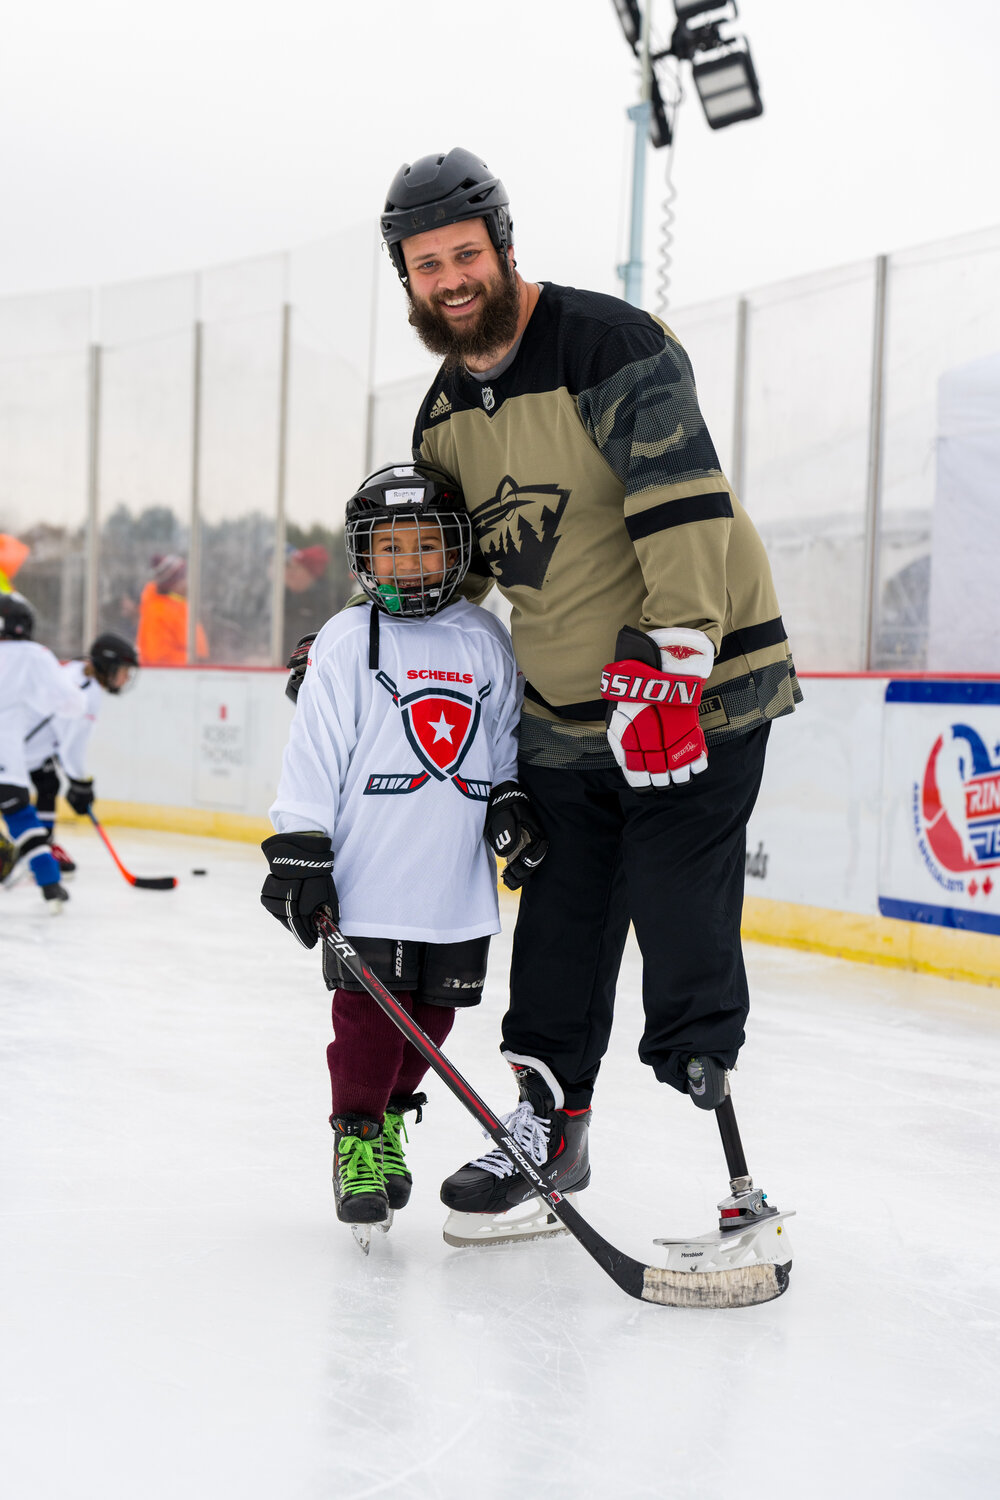 Erik Mossberg lost part of his leg in active duty. He had never skated with his son Ragnar until Saturday at United Heroes League. A team of people worked for over a year to build him a custom prosthetic with a Bauer skate so that he could surprise his son on Veterans Day.